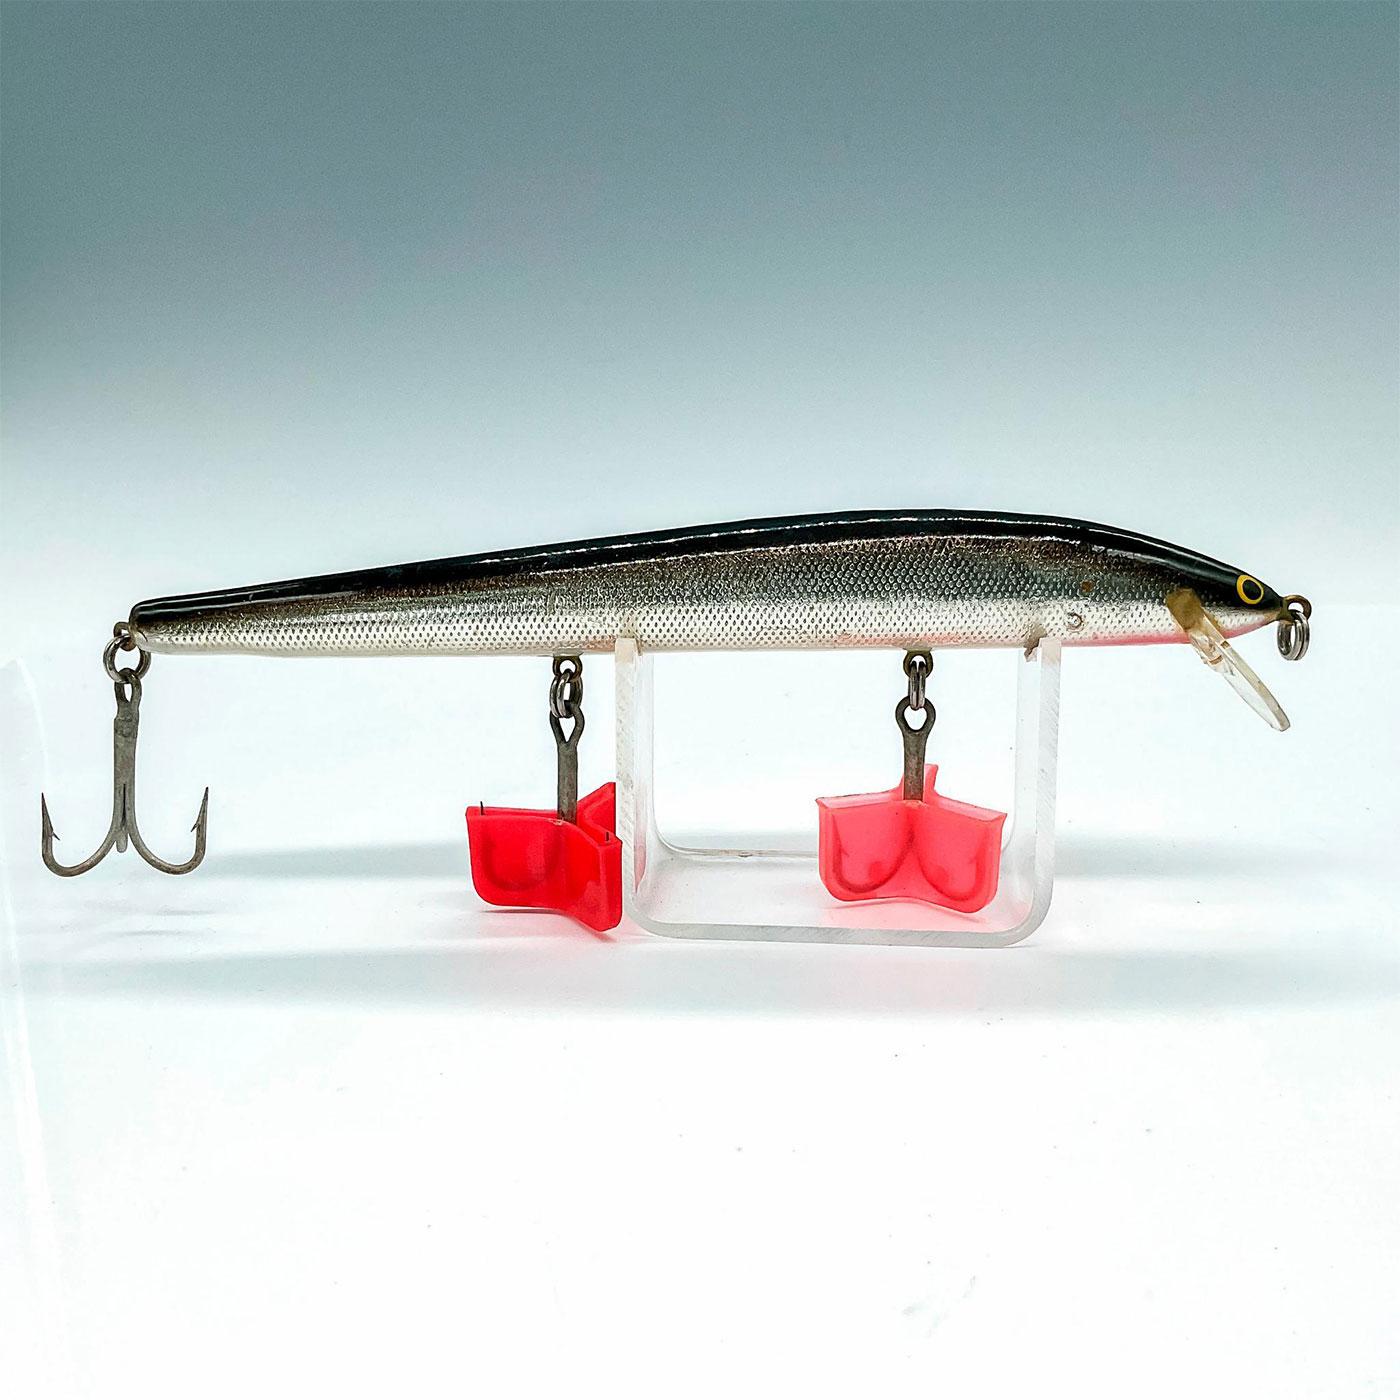 Bagley's Minnow Fishing Lure 7 Inch Silver and Black